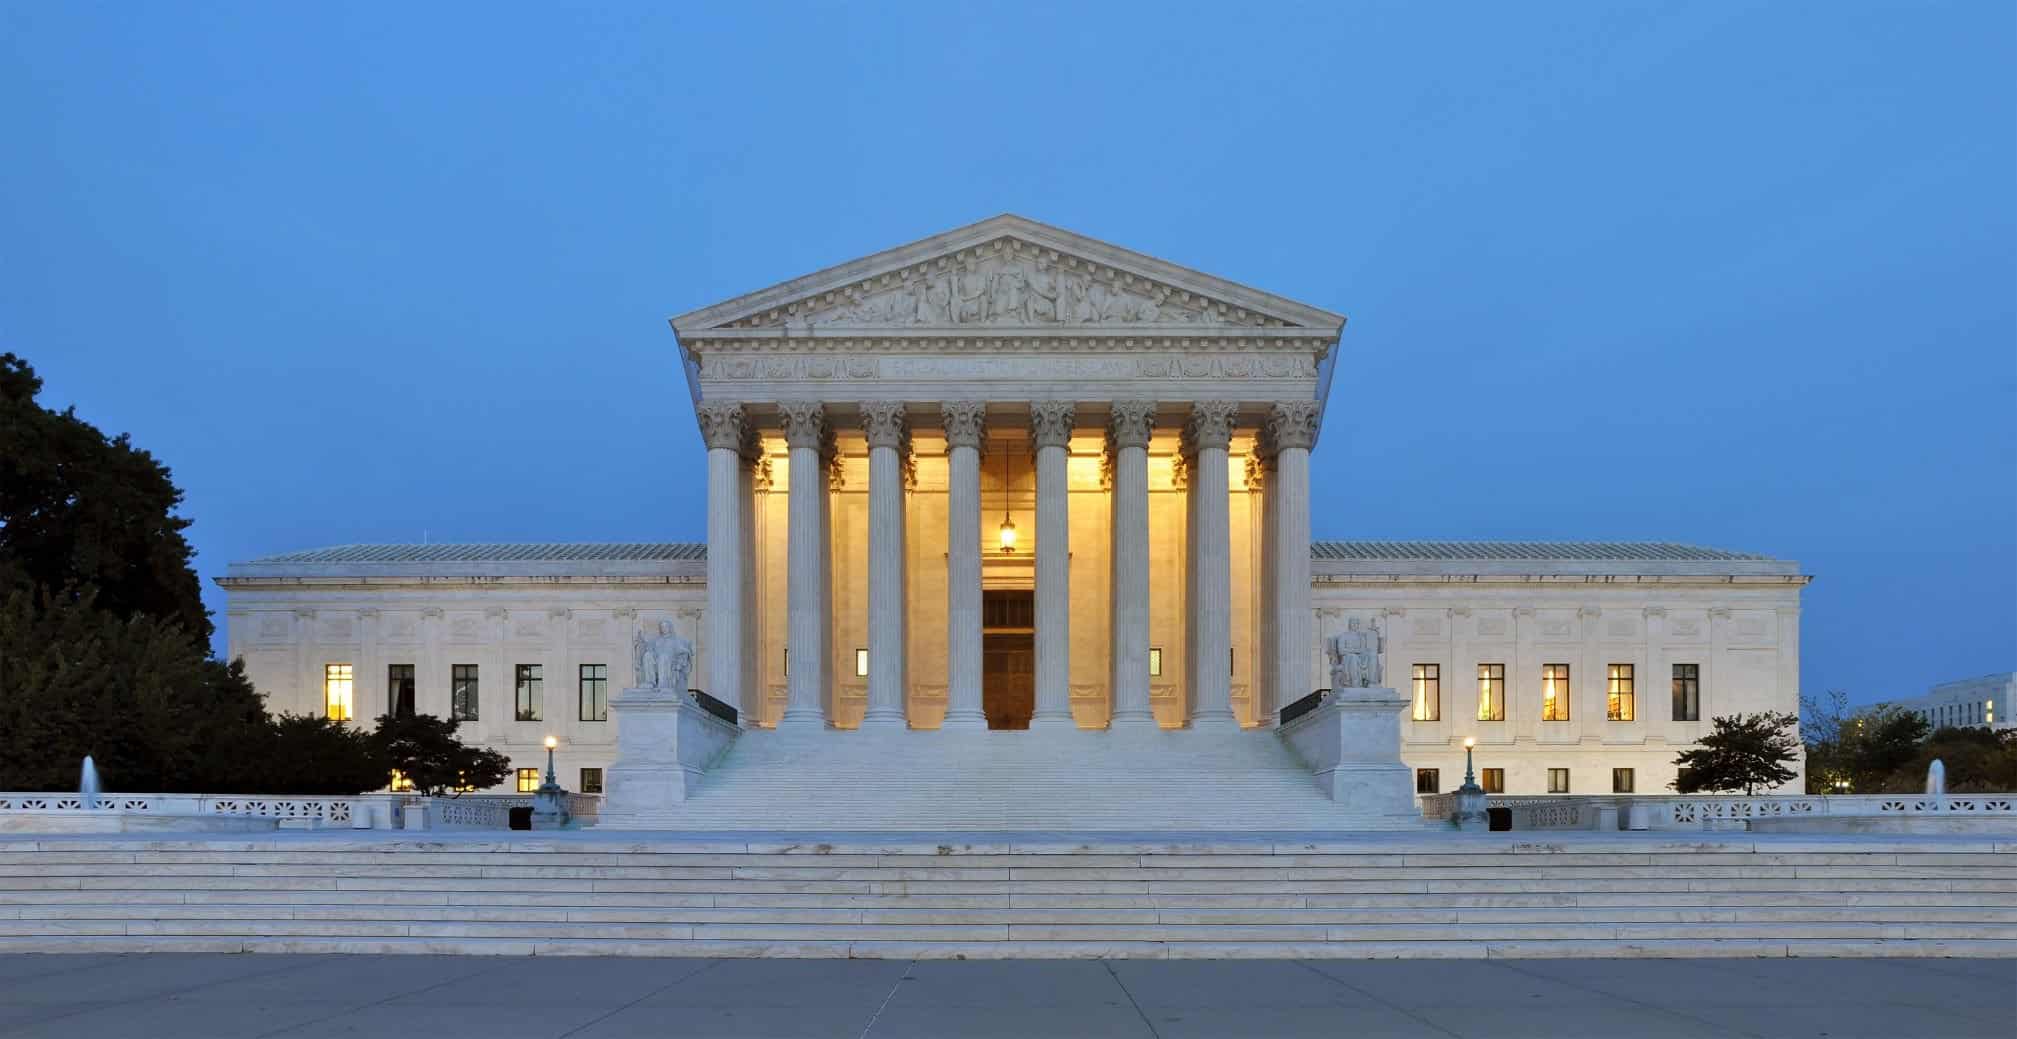 The front steps of the US Supreme Court are shown at dusk